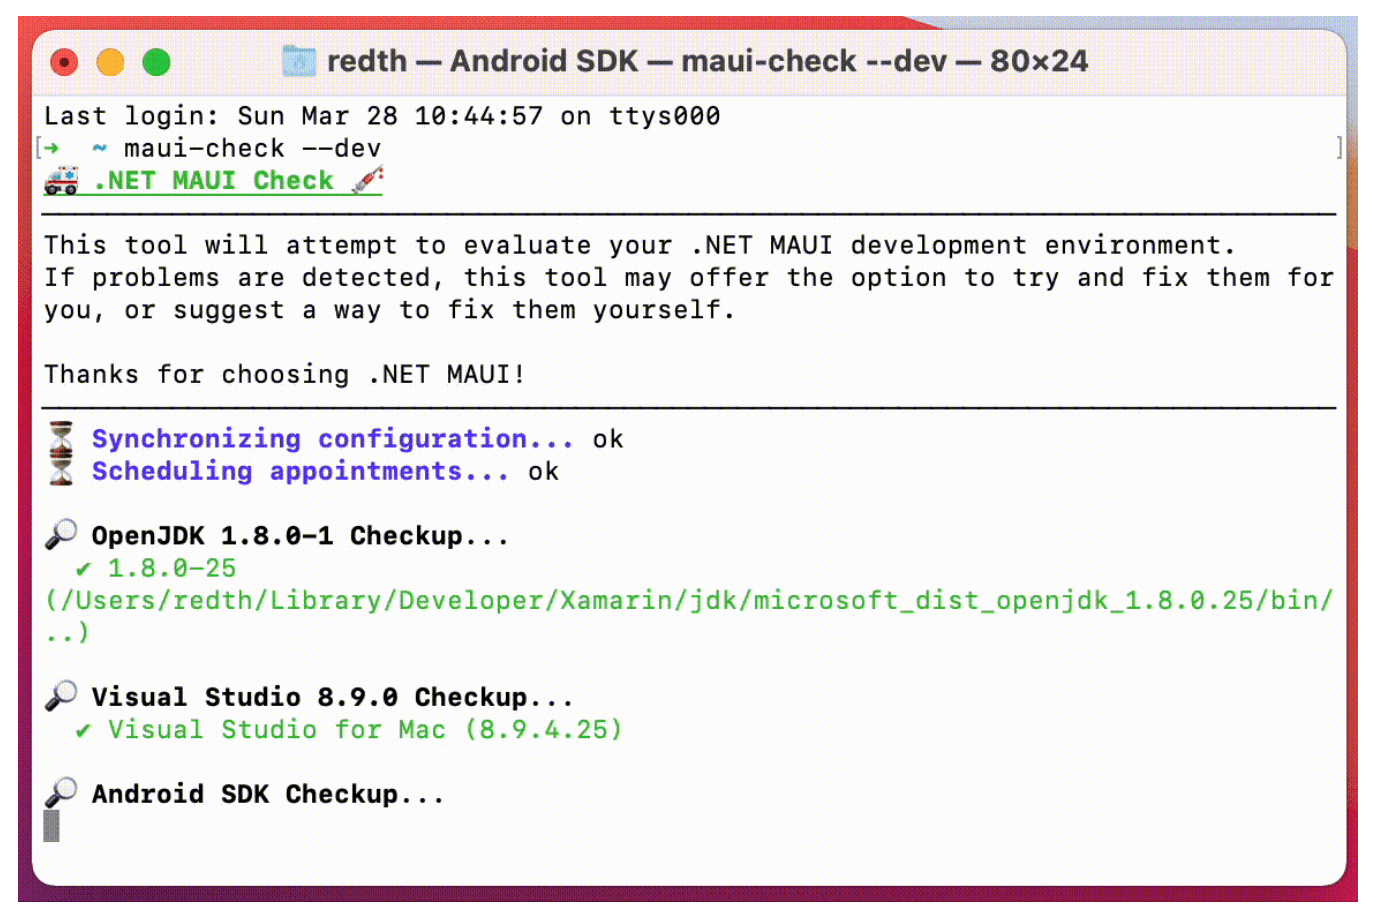 A window with header 'redth — Android SDK — maui-check --dev — 80x24' introduces .NET MAUI Check. 'This tool will attempt to evaluate your .NET MAUI development environment.' and shows it configuring.